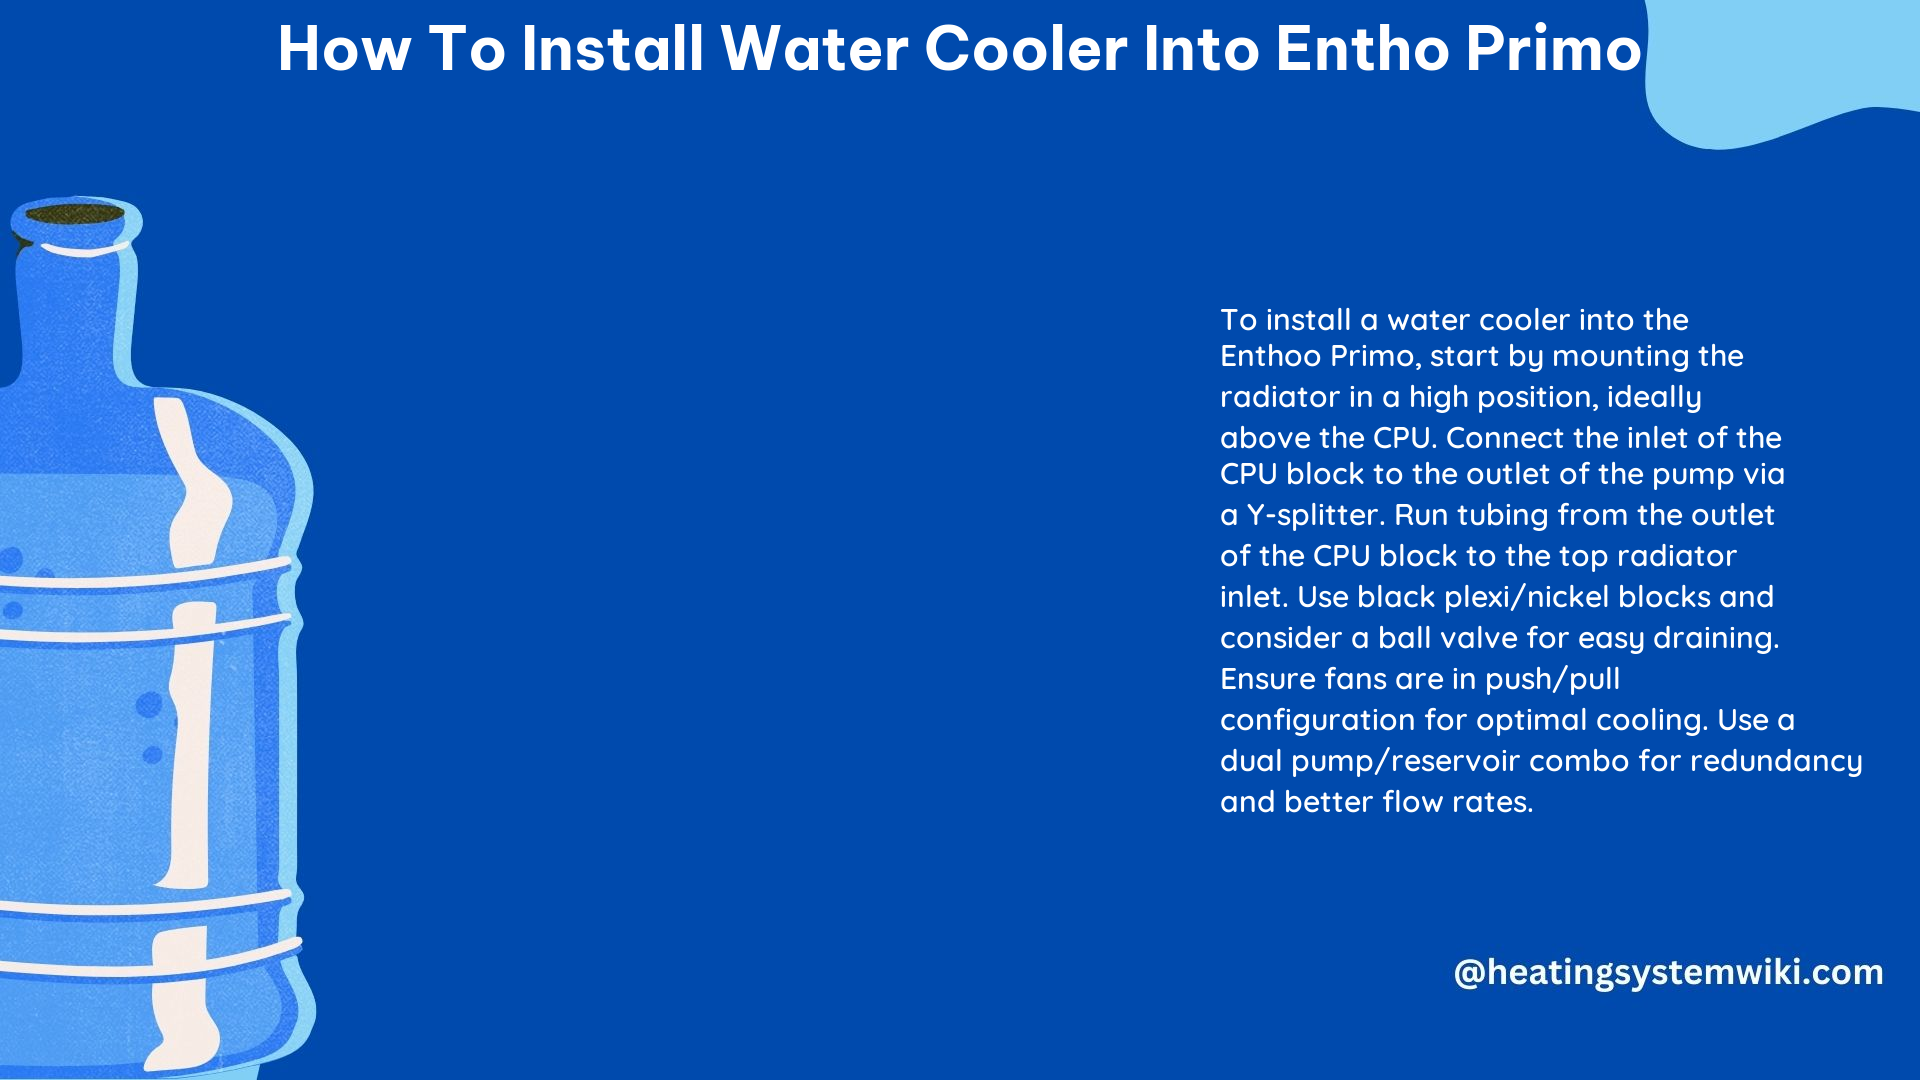 How to Install Water Cooler Into Entho Primo